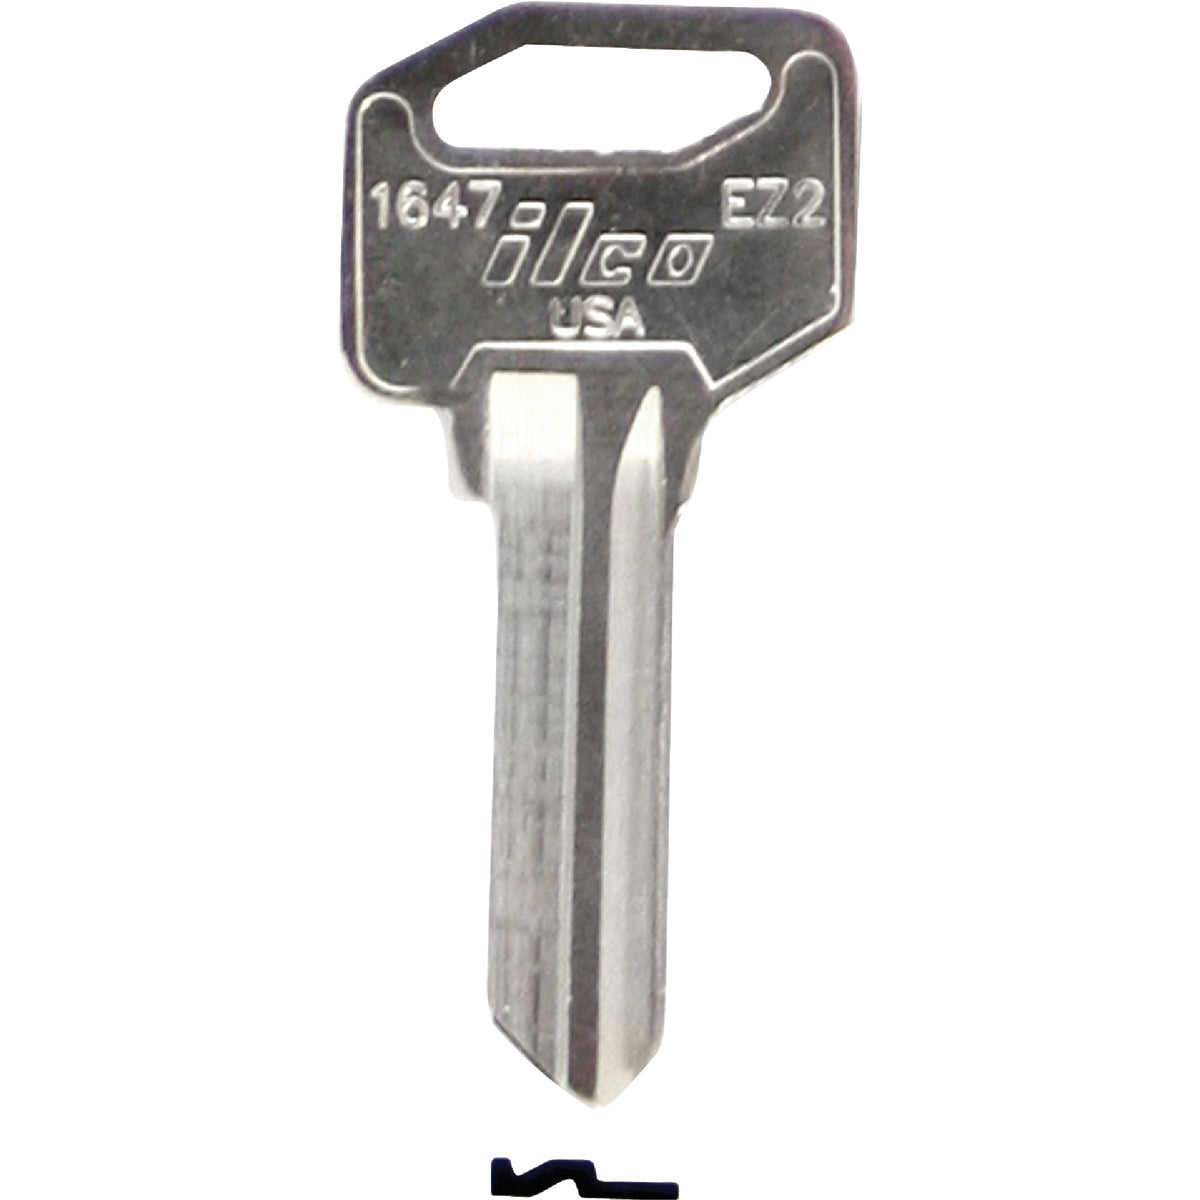 Item 235423, Nickel-plated key blank. When you order one, you will receive 10 keys.